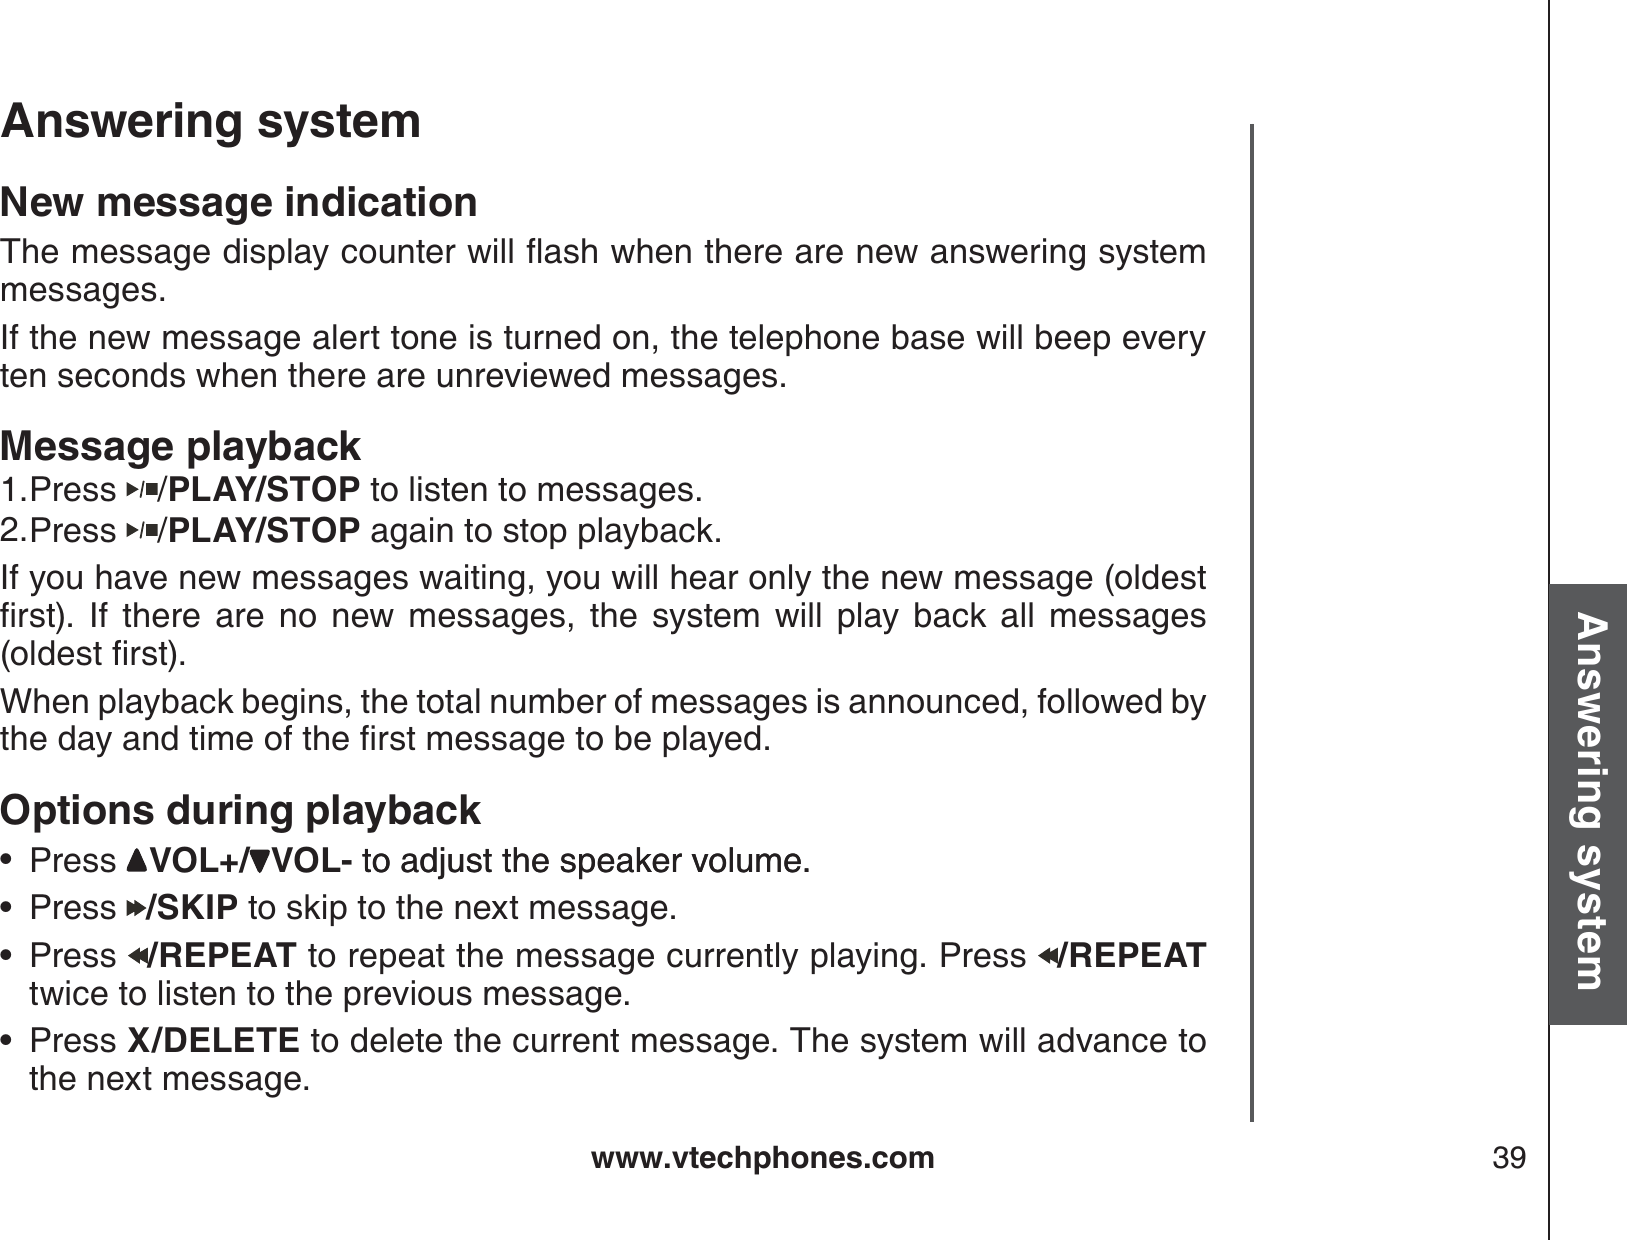 www.vtechphones.com 39Basic operationAnswering systemAnswering system New message indication6JGOGUUCIGFKURNC[EQWPVGTYKNNƀCUJYJGPVJGTGCTGPGYCPUYGTKPIU[UVGOmessages.If the new message alert tone is turned on, the telephone base will beep every ten seconds when there are unreviewed messages.Message playbackPress  /PLAY/STOP to listen to messages. Press  /PLAY/STOP again to stop playback.If you have new messages waiting, you will hear only the new message (oldest ſTUV +H VJGTG CTG PQ PGY OGUUCIGU VJG U[UVGO YKNN RNC[ DCEM CNN OGUUCIGUQNFGUVſTUVWhen playback begins, the total number of messages is announced, followed by VJGFC[CPFVKOGQHVJGſTUVOGUUCIGVQDGRNC[GFOptions during playbackPress  VOL+/ VOL- to adjust the speaker volume.to adjust the speaker volume.Press  /SKIP to skip to the next message.Press  /REPEAT to repeat the message currently playing. Press  /REPEAT twice to listen to the previous message.Press X/DELETE to delete the current message. The system will advance to the next message.1.2.••••